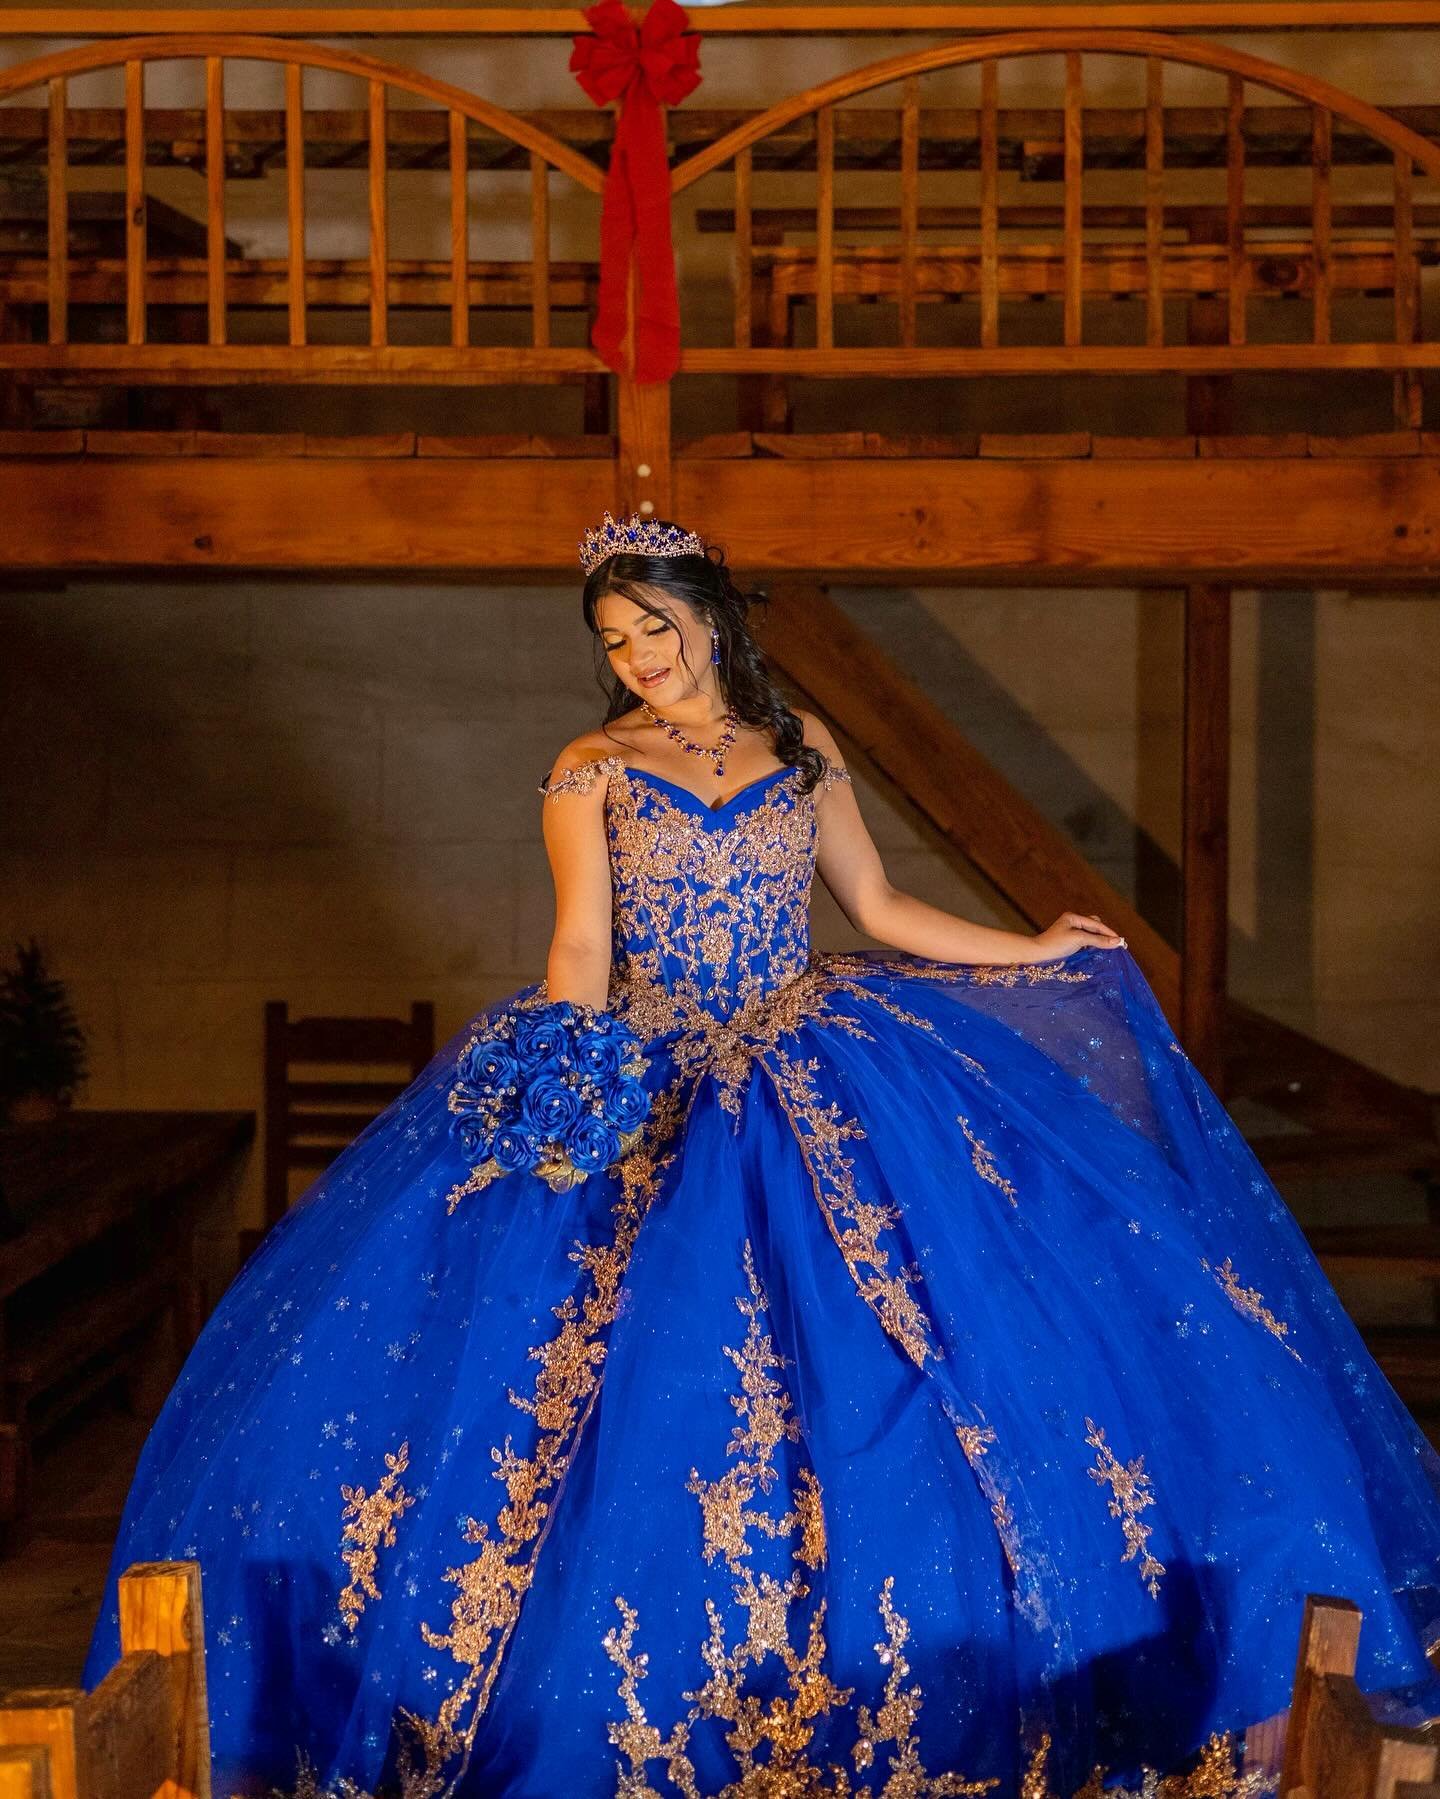 Thank you for sharing these beautiful photos from the session Ms. Cervantes 💙✨ She looks like a literal Princess 👑 We appreciate your trust in us all these months, we hope you loved everything! 🥹🏰
✨
✨✨
✨✨✨
✨✨✨✨
✨✨✨✨✨
✨✨✨✨
✨✨✨
✨✨
✨
#mycastleboutiq